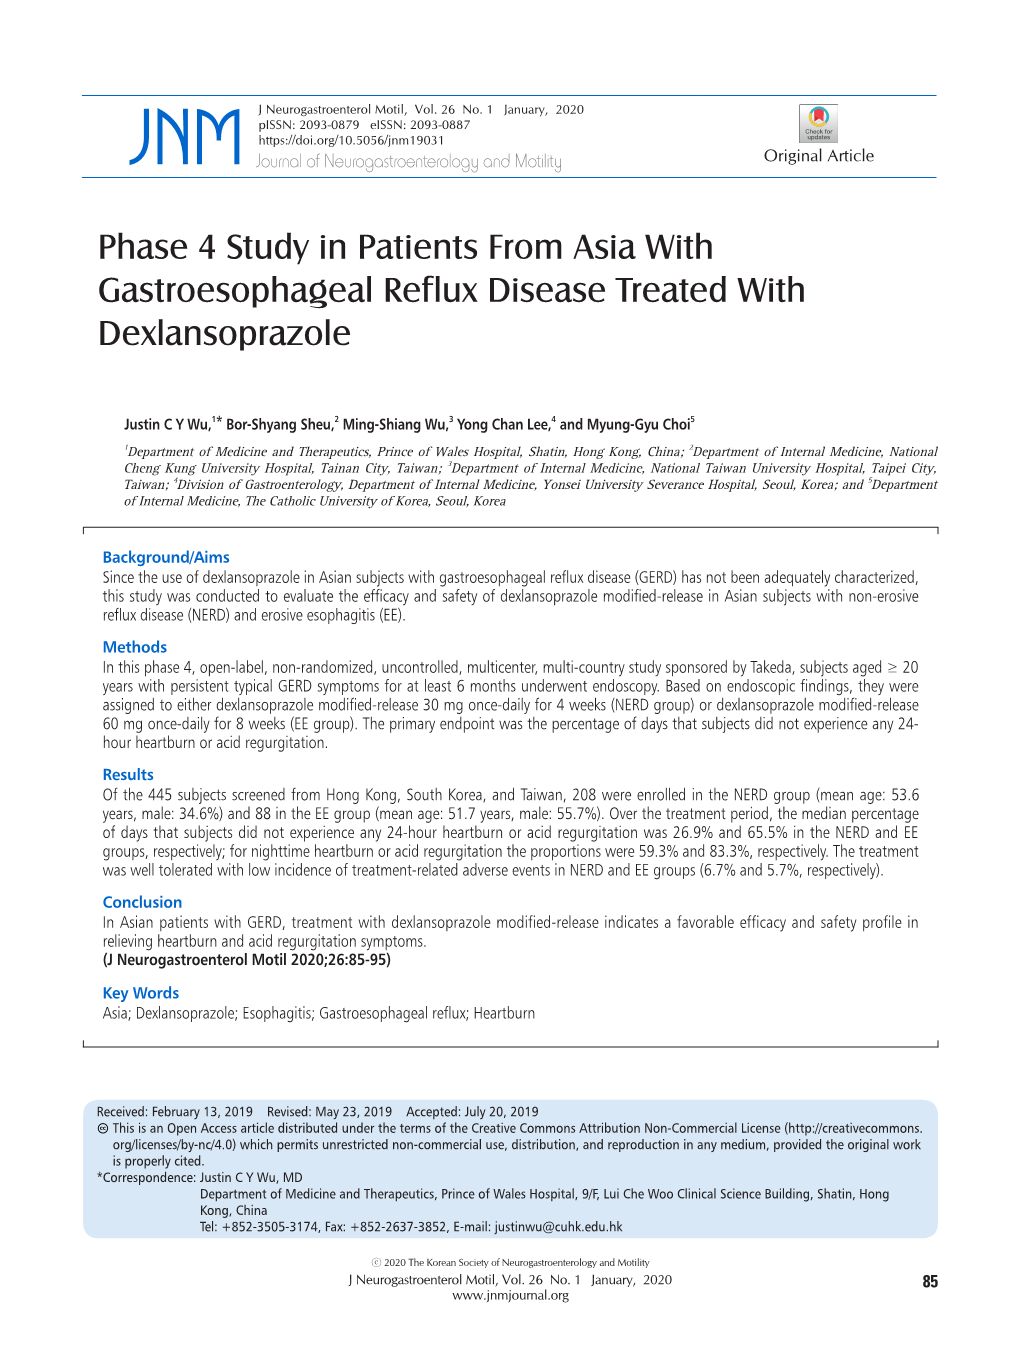 Phase 4 Study in Patients from Asia with Gastroesophageal Reflux Disease Treated with Dexlansoprazole